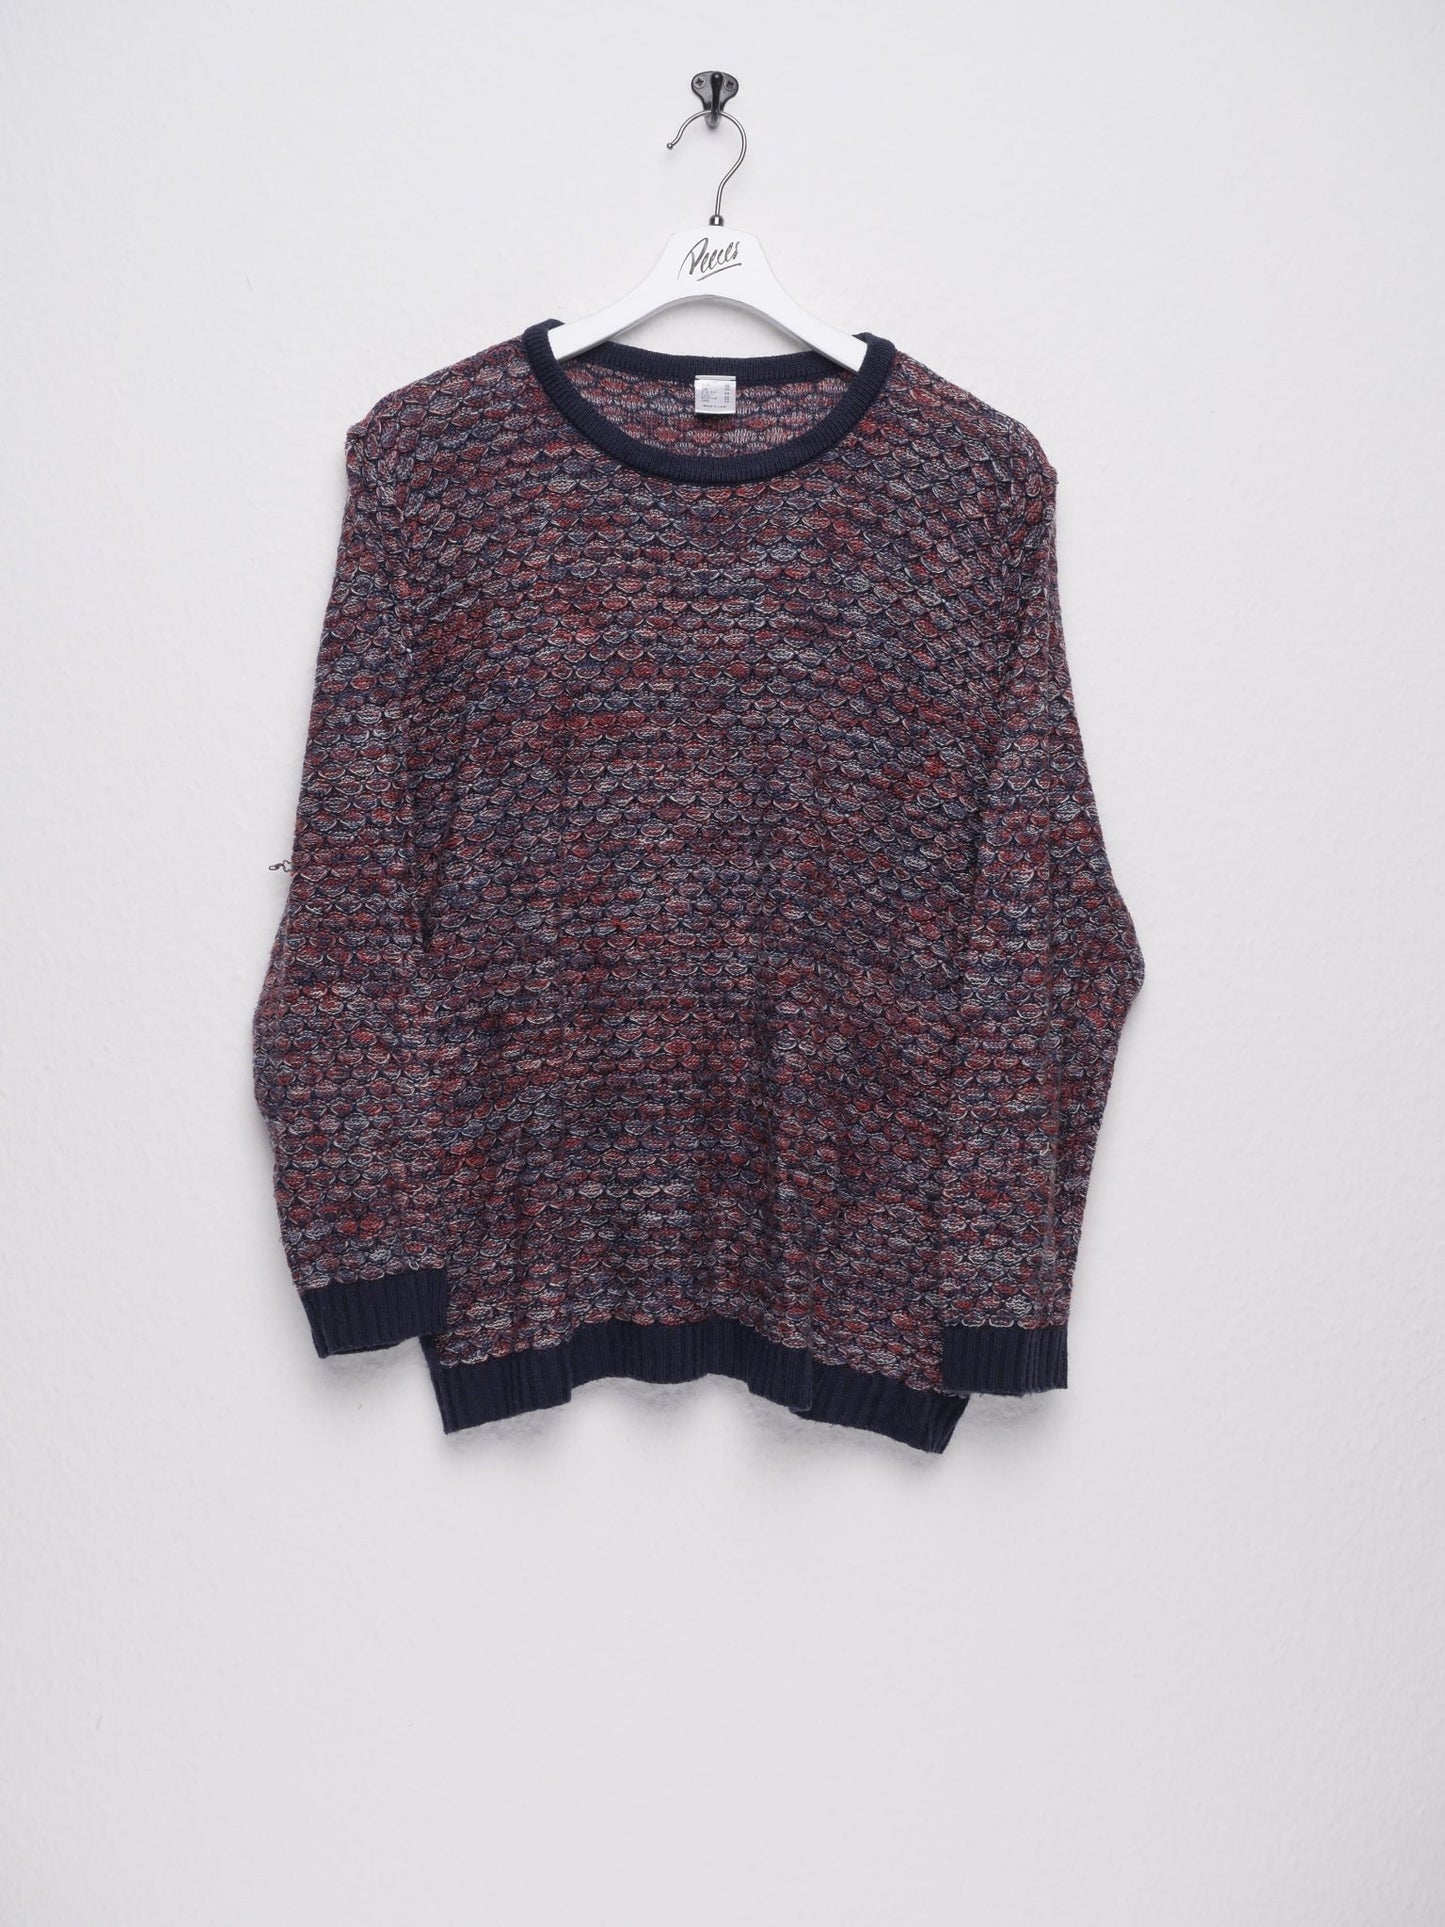 patterned Vintage Knit Sweater - Peeces